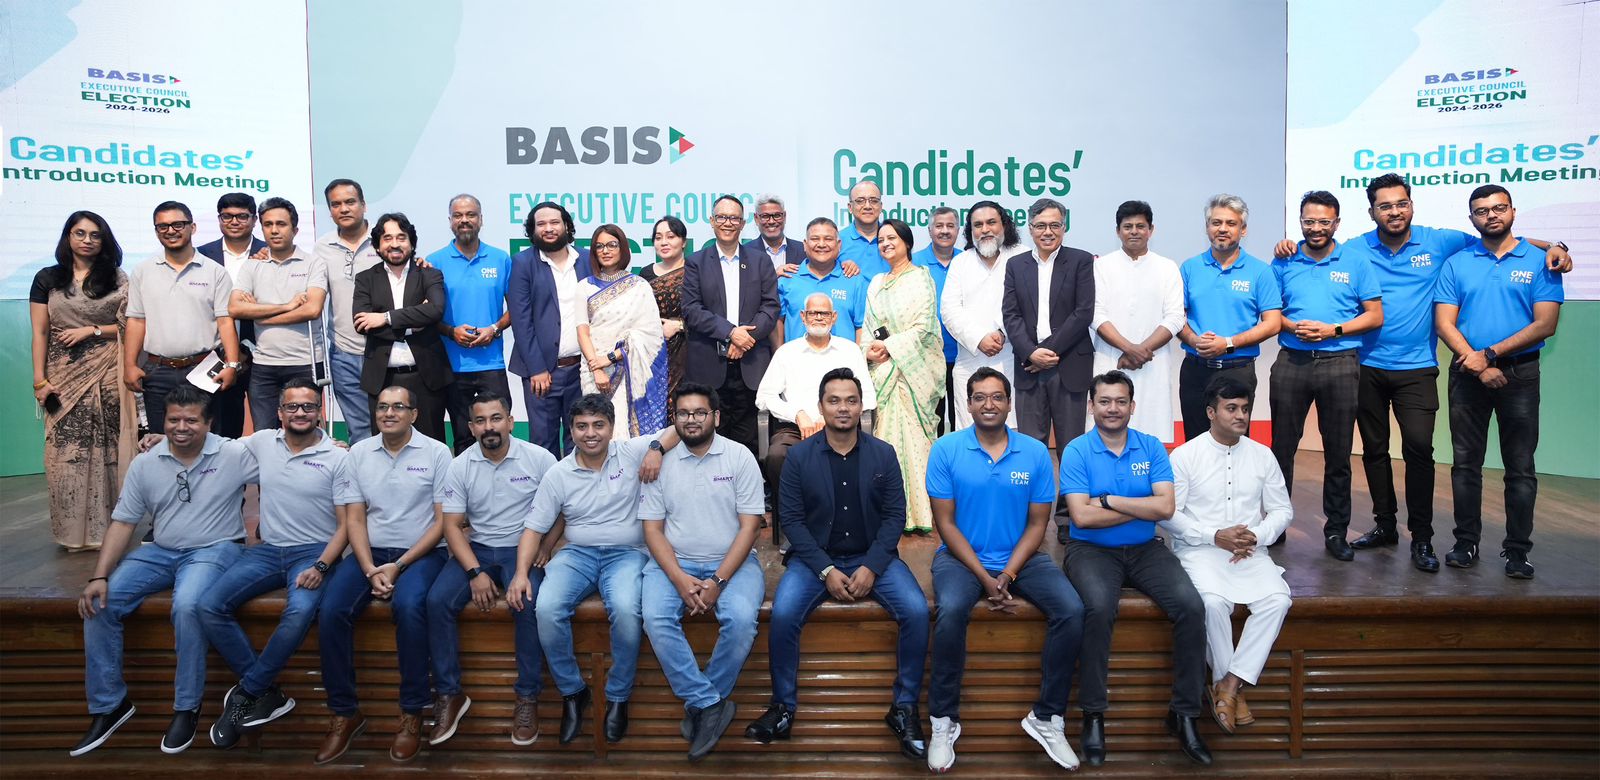 BASIS Election: BASIS hosts Candidates’ introduction meeting